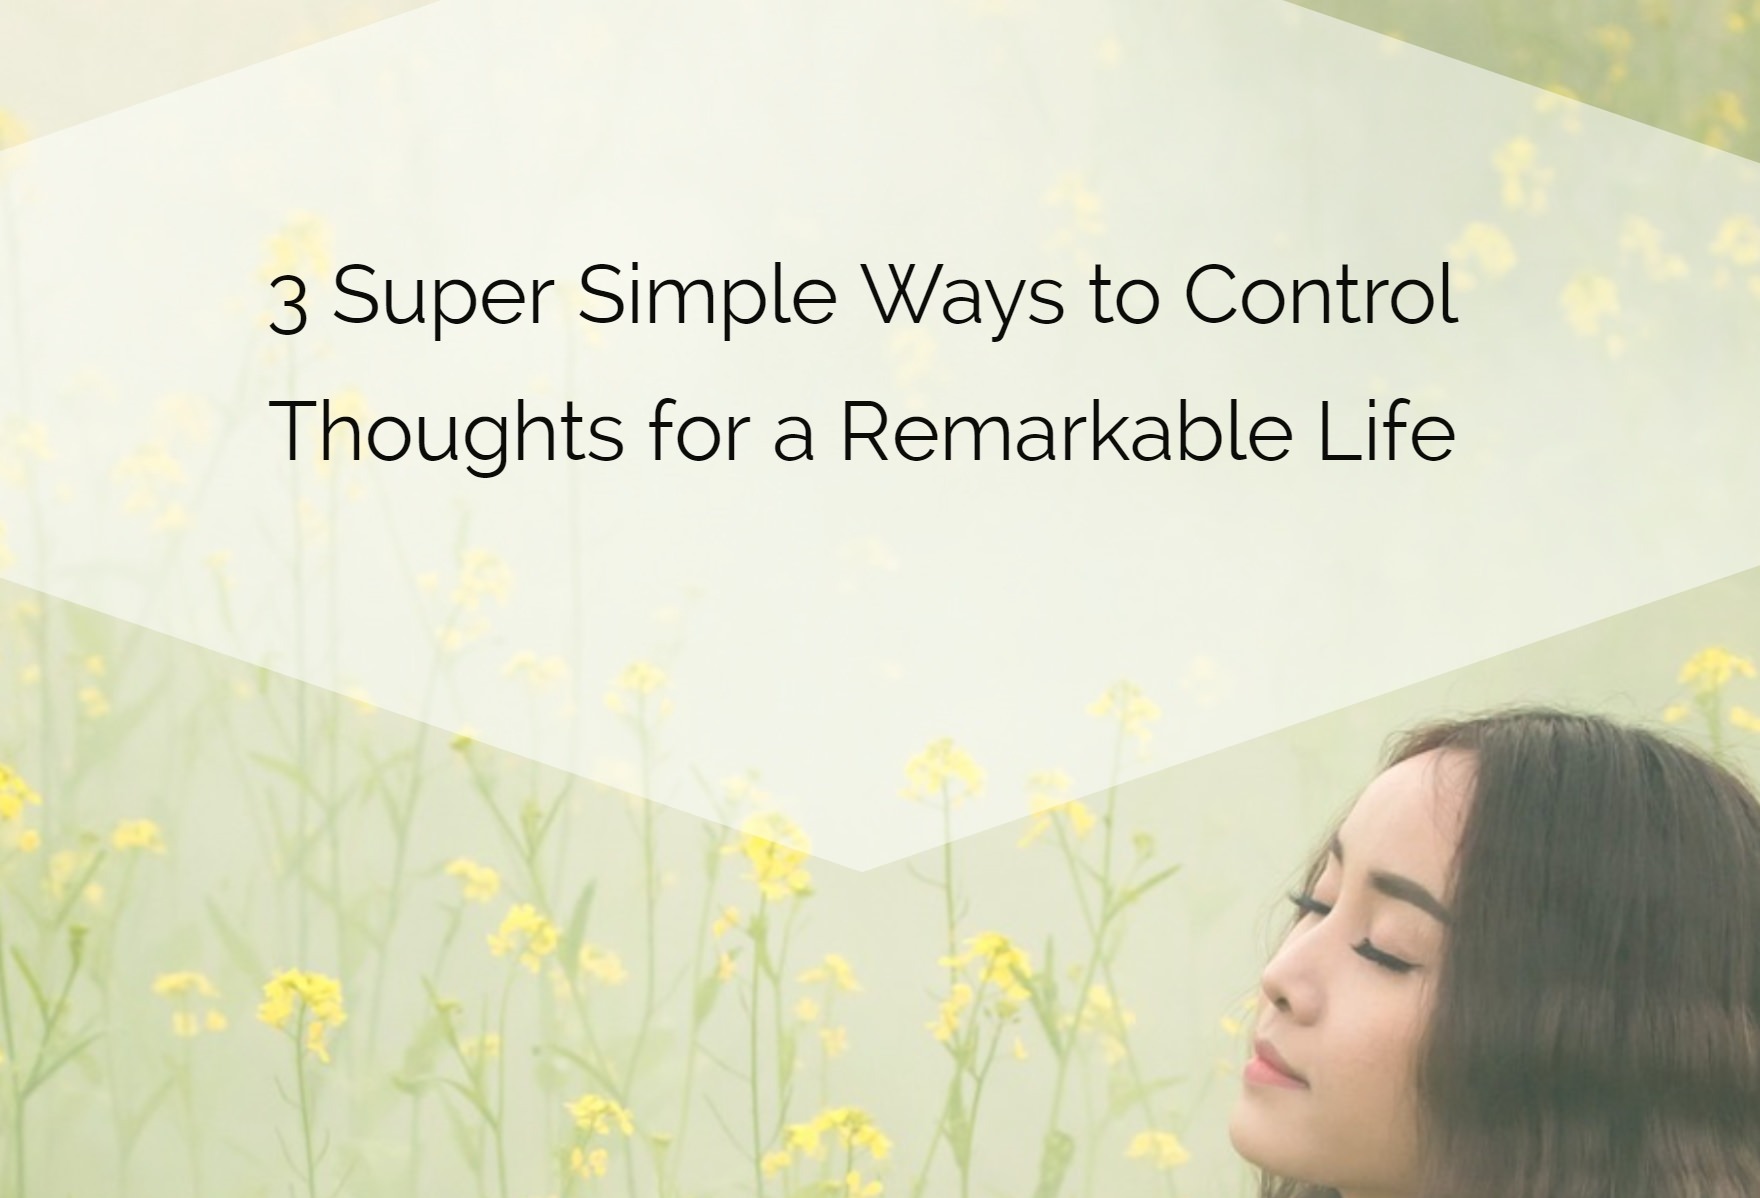 3 Super Simple Ways to Control Thoughts for a Remarkable Life